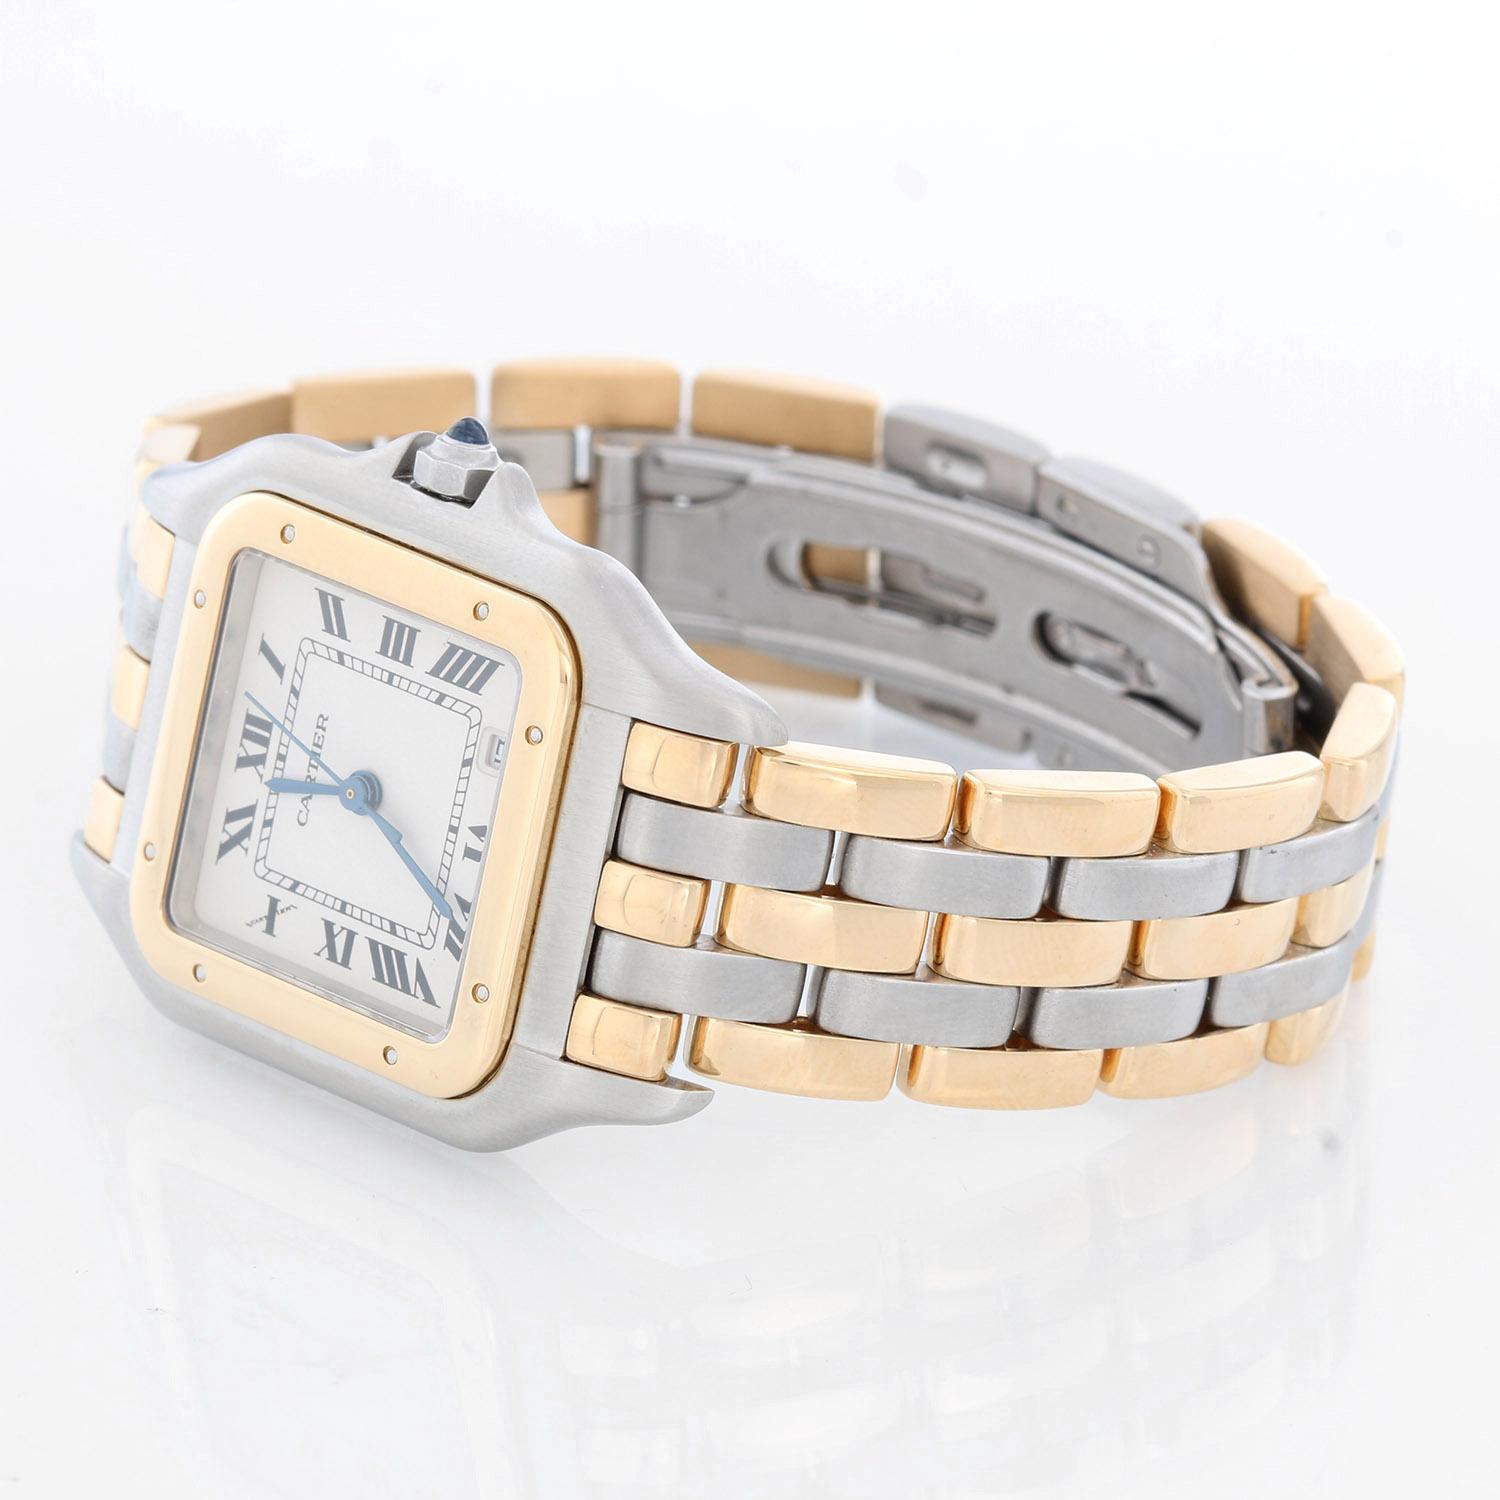 Cartier 3-Row Panther 2-Tone Steel & Gold Watch W25027B8 - Quartz. Stainless steel case with 18k yellow gold bezel (29mm x 40mm). Ivory colored dial with black Roman numerals and date at 3 o'clock. Stainless steel and 18k yellow 3-row Cartier